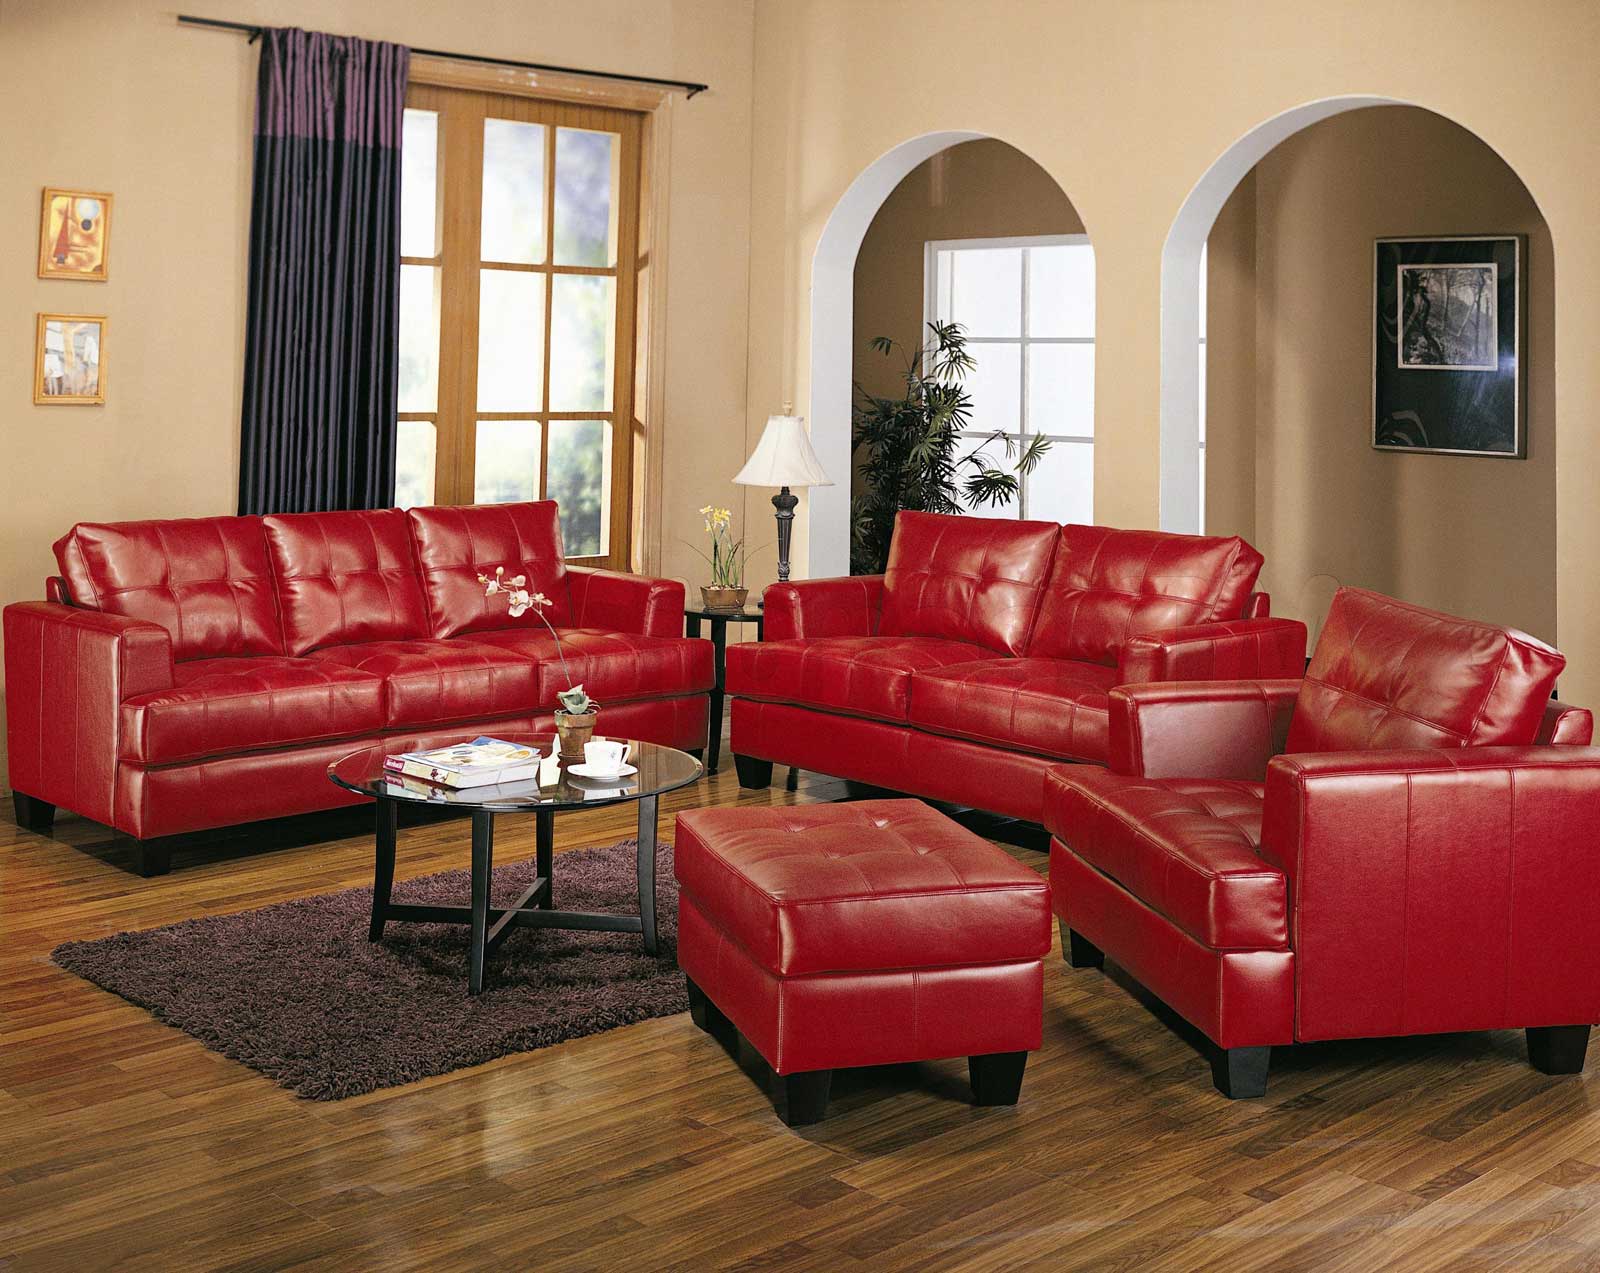 Red Sofa Of Adorable Red Sofa And Loveseat Of Living Room Furniture Sets Furnished With Chair Plus Ottoman And Completed With Glass Round Table On Soft Rug Furniture The Best Living Room Furniture Sets